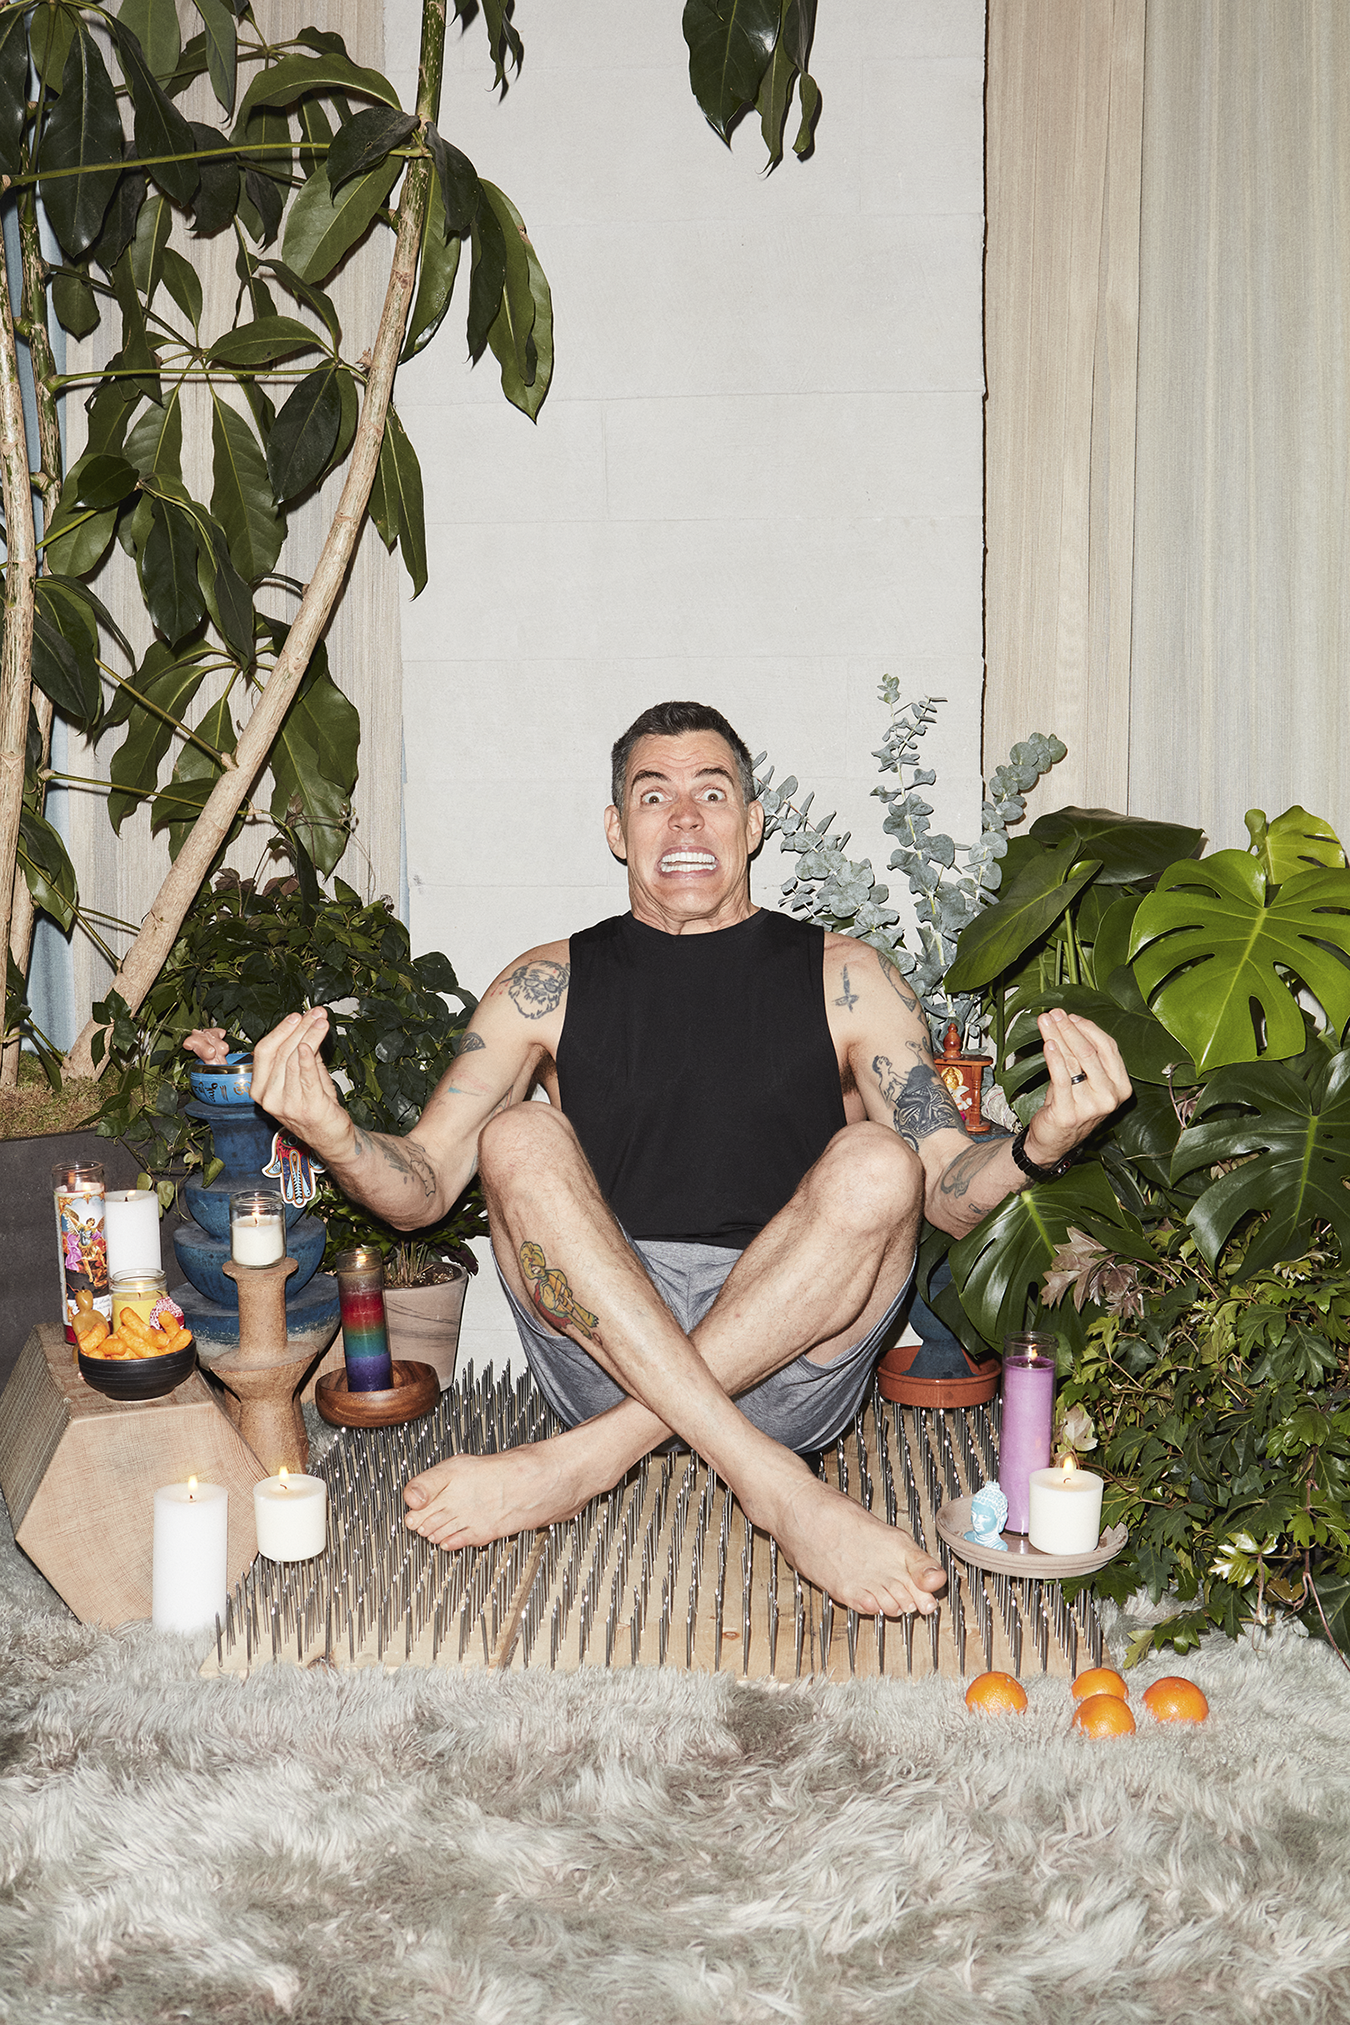 Steve-O Talks Comedy, Stunts, Sobriety and All Things Jackass